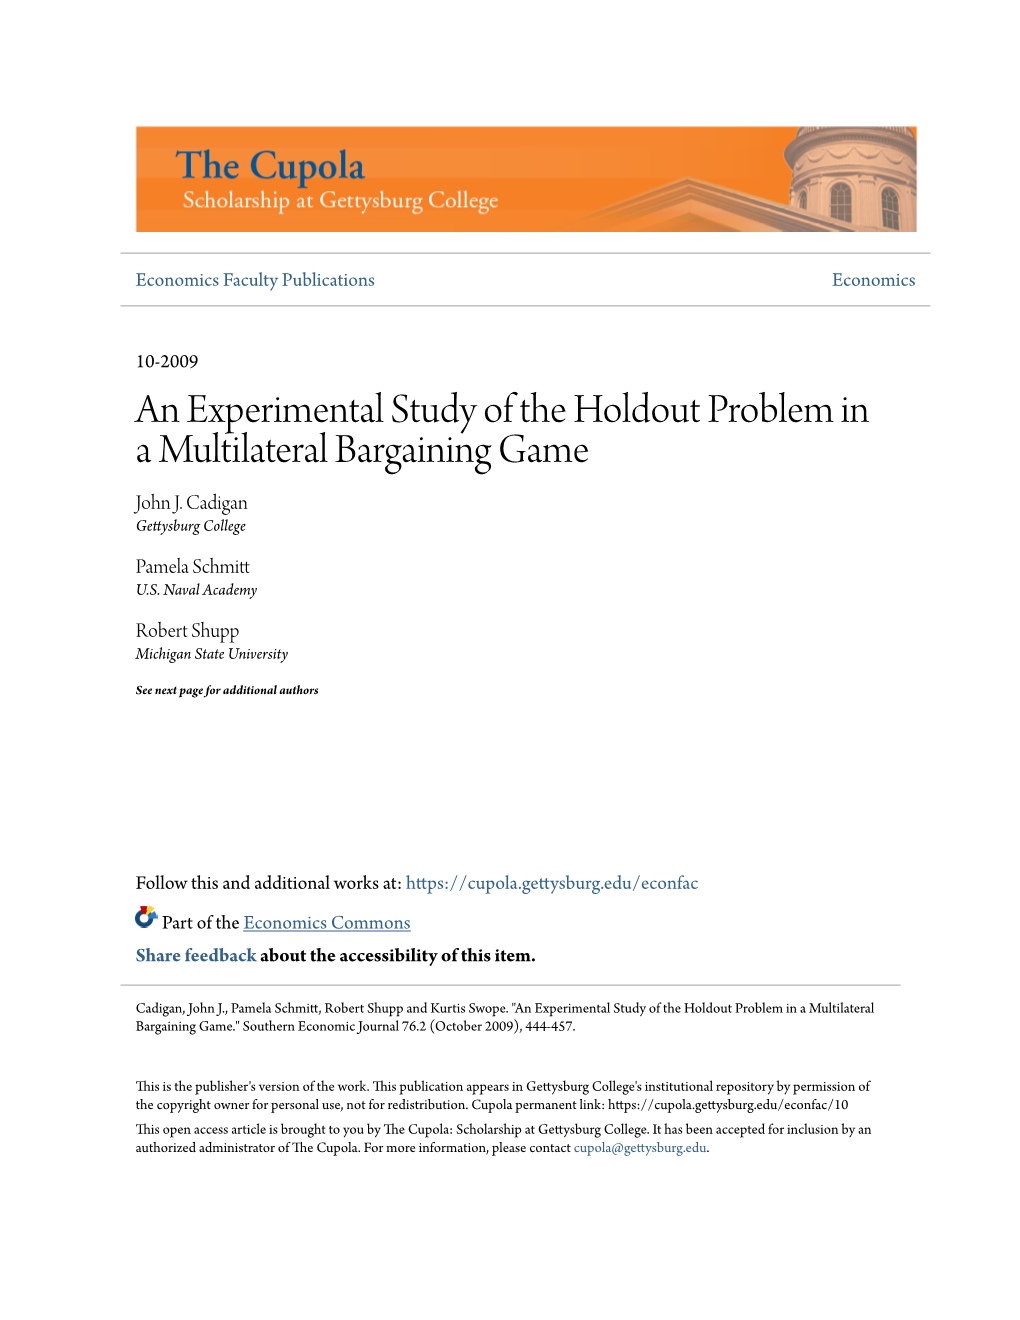 An Experimental Study of the Holdout Problem in a Multilateral Bargaining Game John J